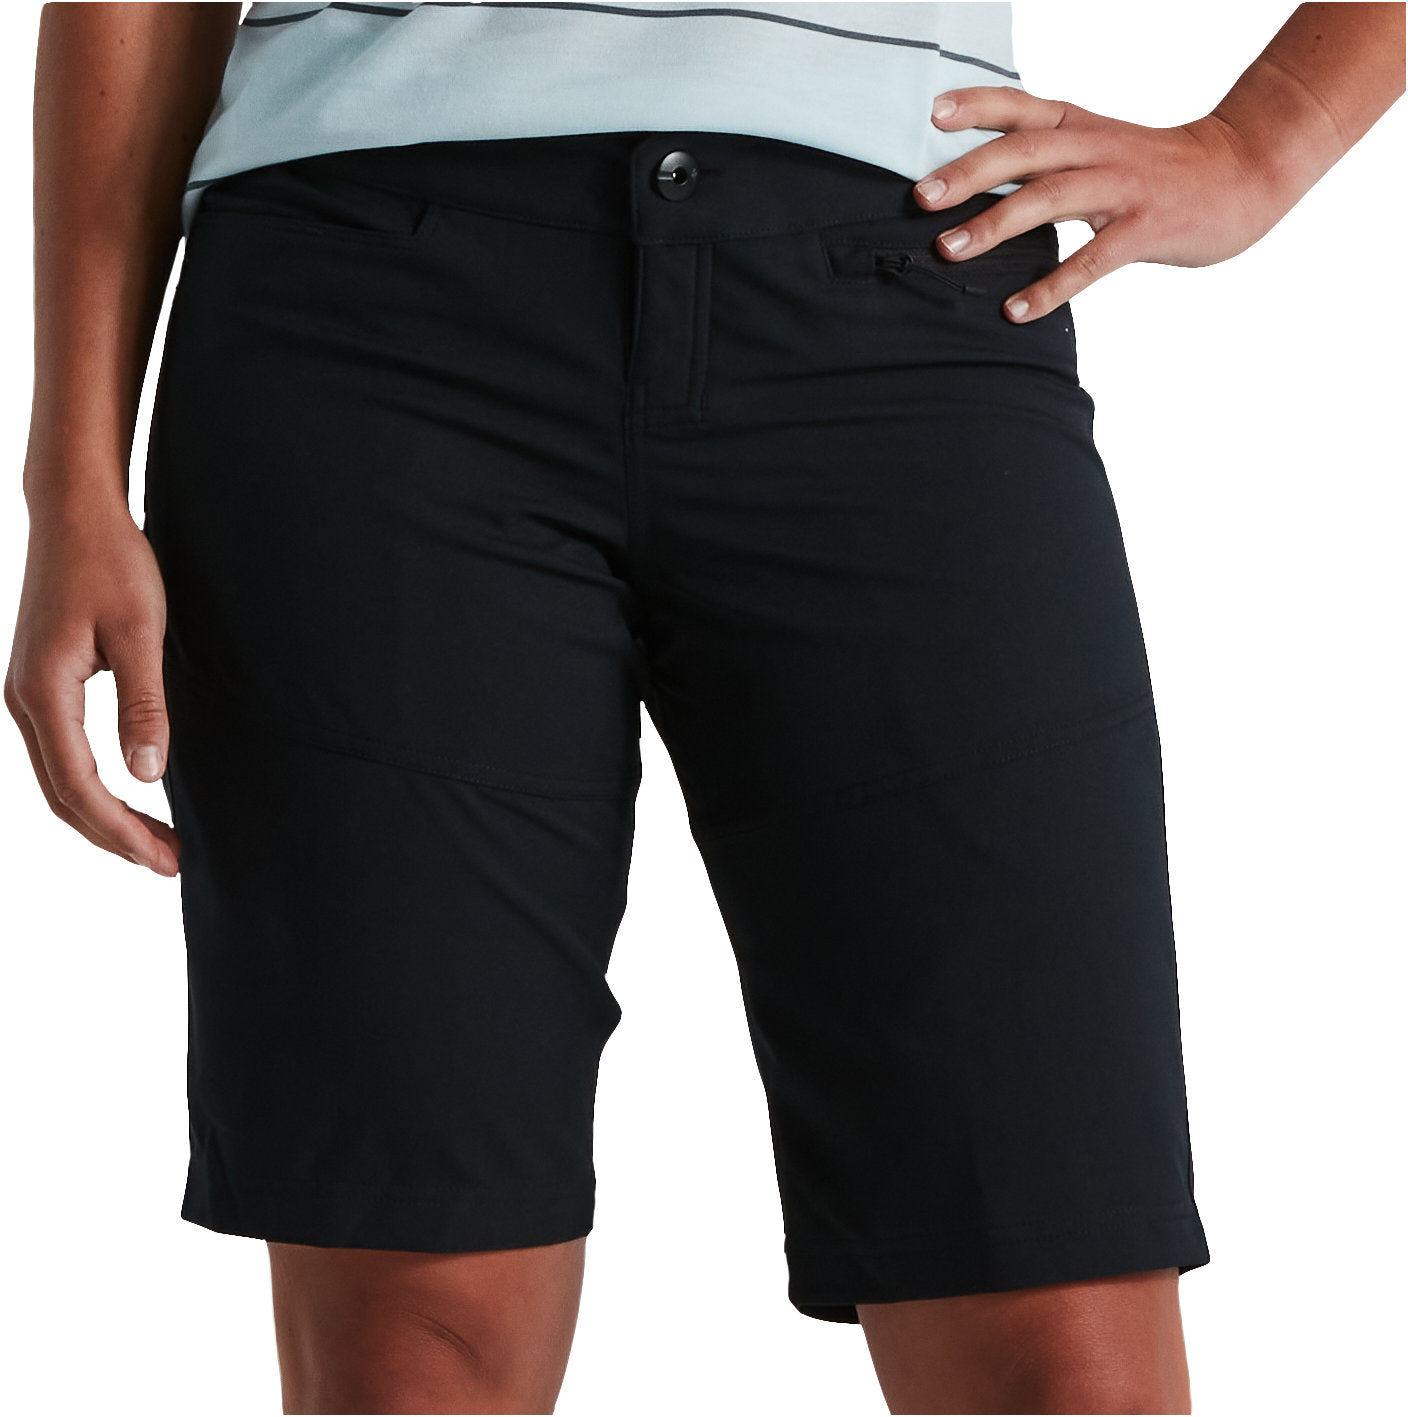 Specialized Women's Trail Short with Liner